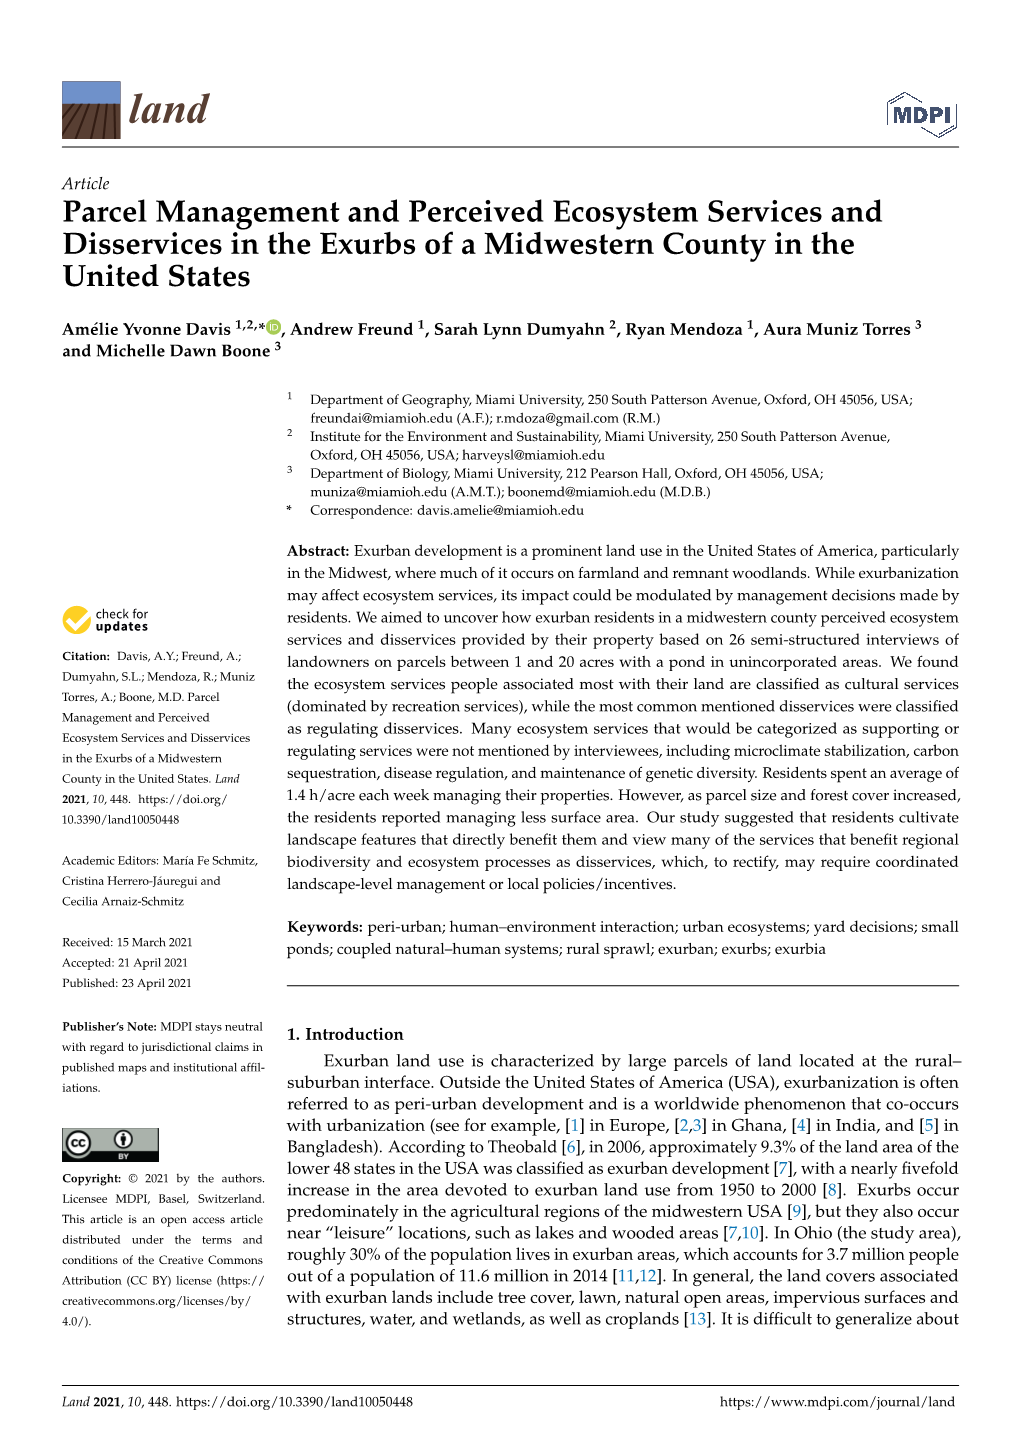 Parcel Management and Perceived Ecosystem Services and Disservices in the Exurbs of a Midwestern County in the United States